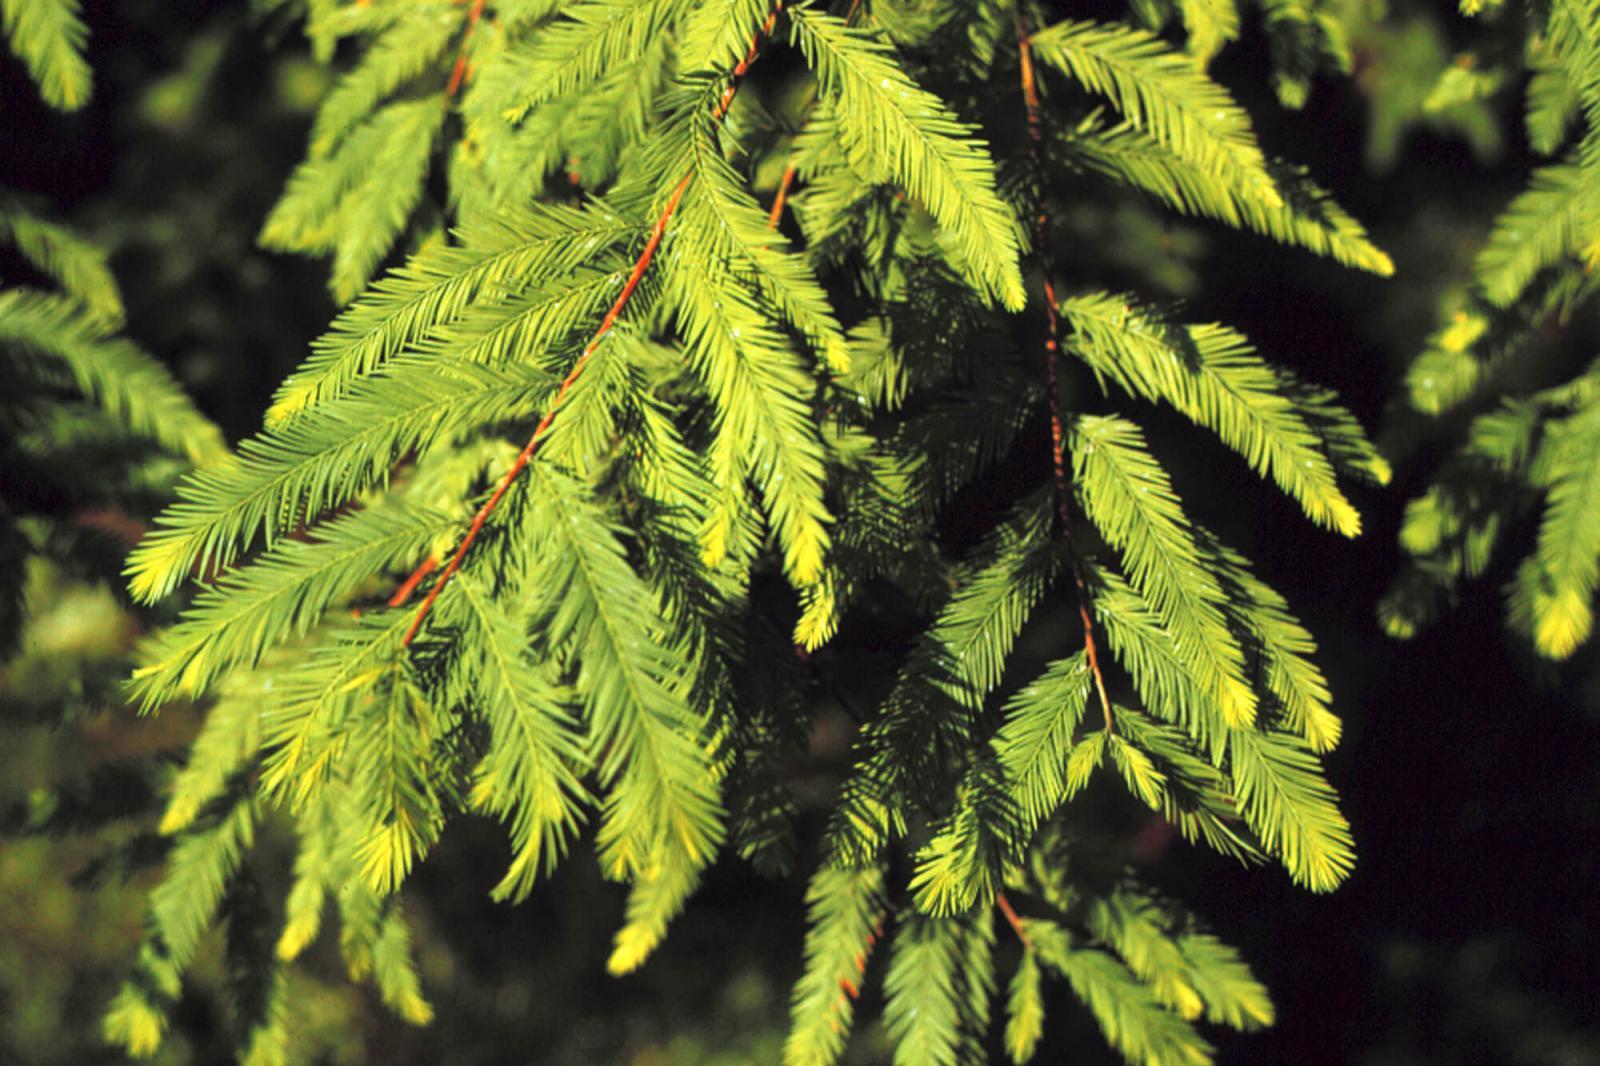 Bald cypress is practical choice for urban areas